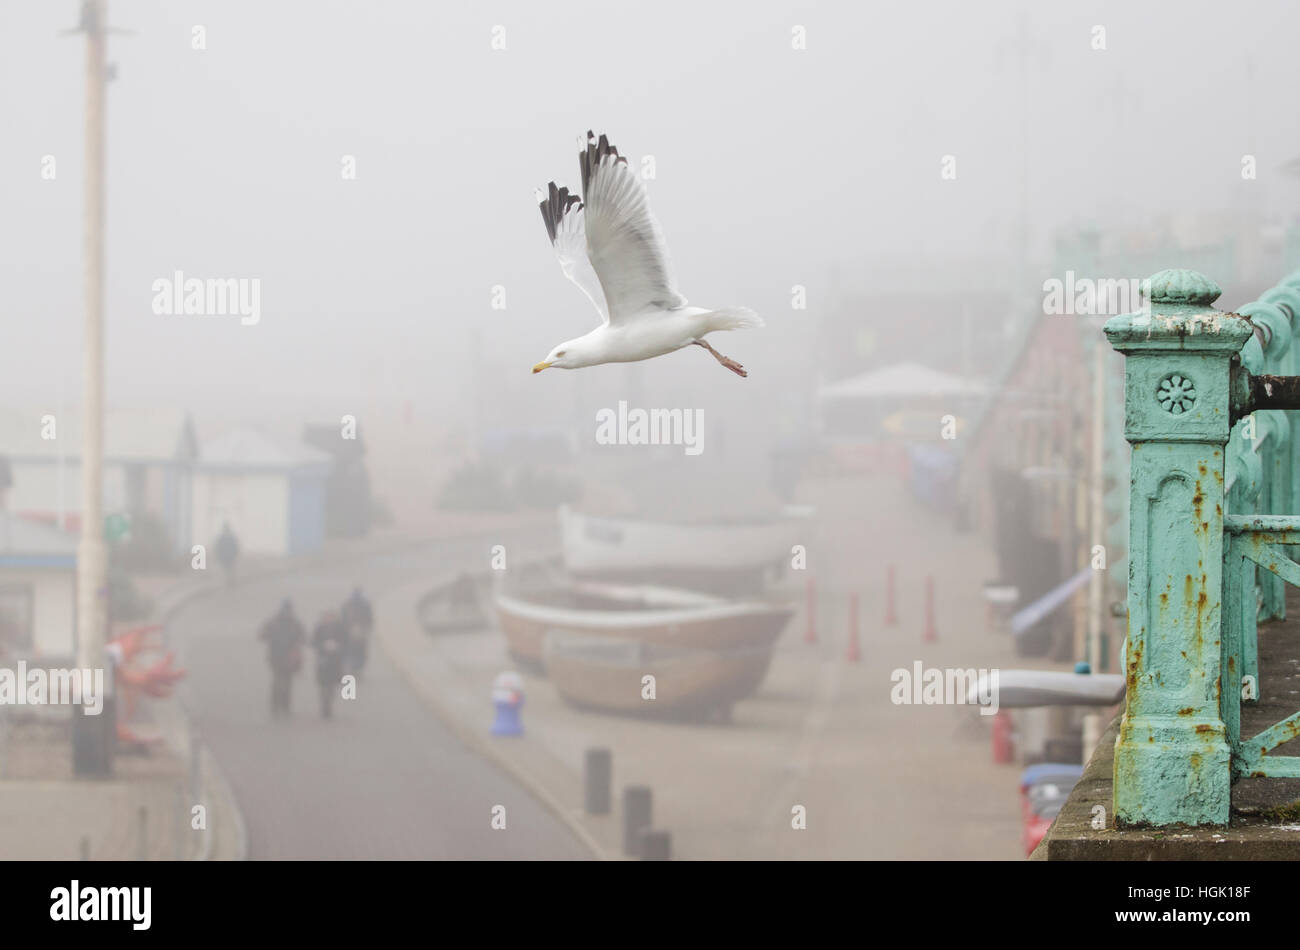 Brighton, East Sussex, UK. 23rd January 2017. UK Weather. Freezing fog and extremely poor visibility persists throughout the day on Brighton seafront. Poor visibility has resulted in hundreds of flight delays and cancellations at London’s airports as dense fog covers much of southern England. Credit: Francesca Moore/Alamy Live News Stock Photo